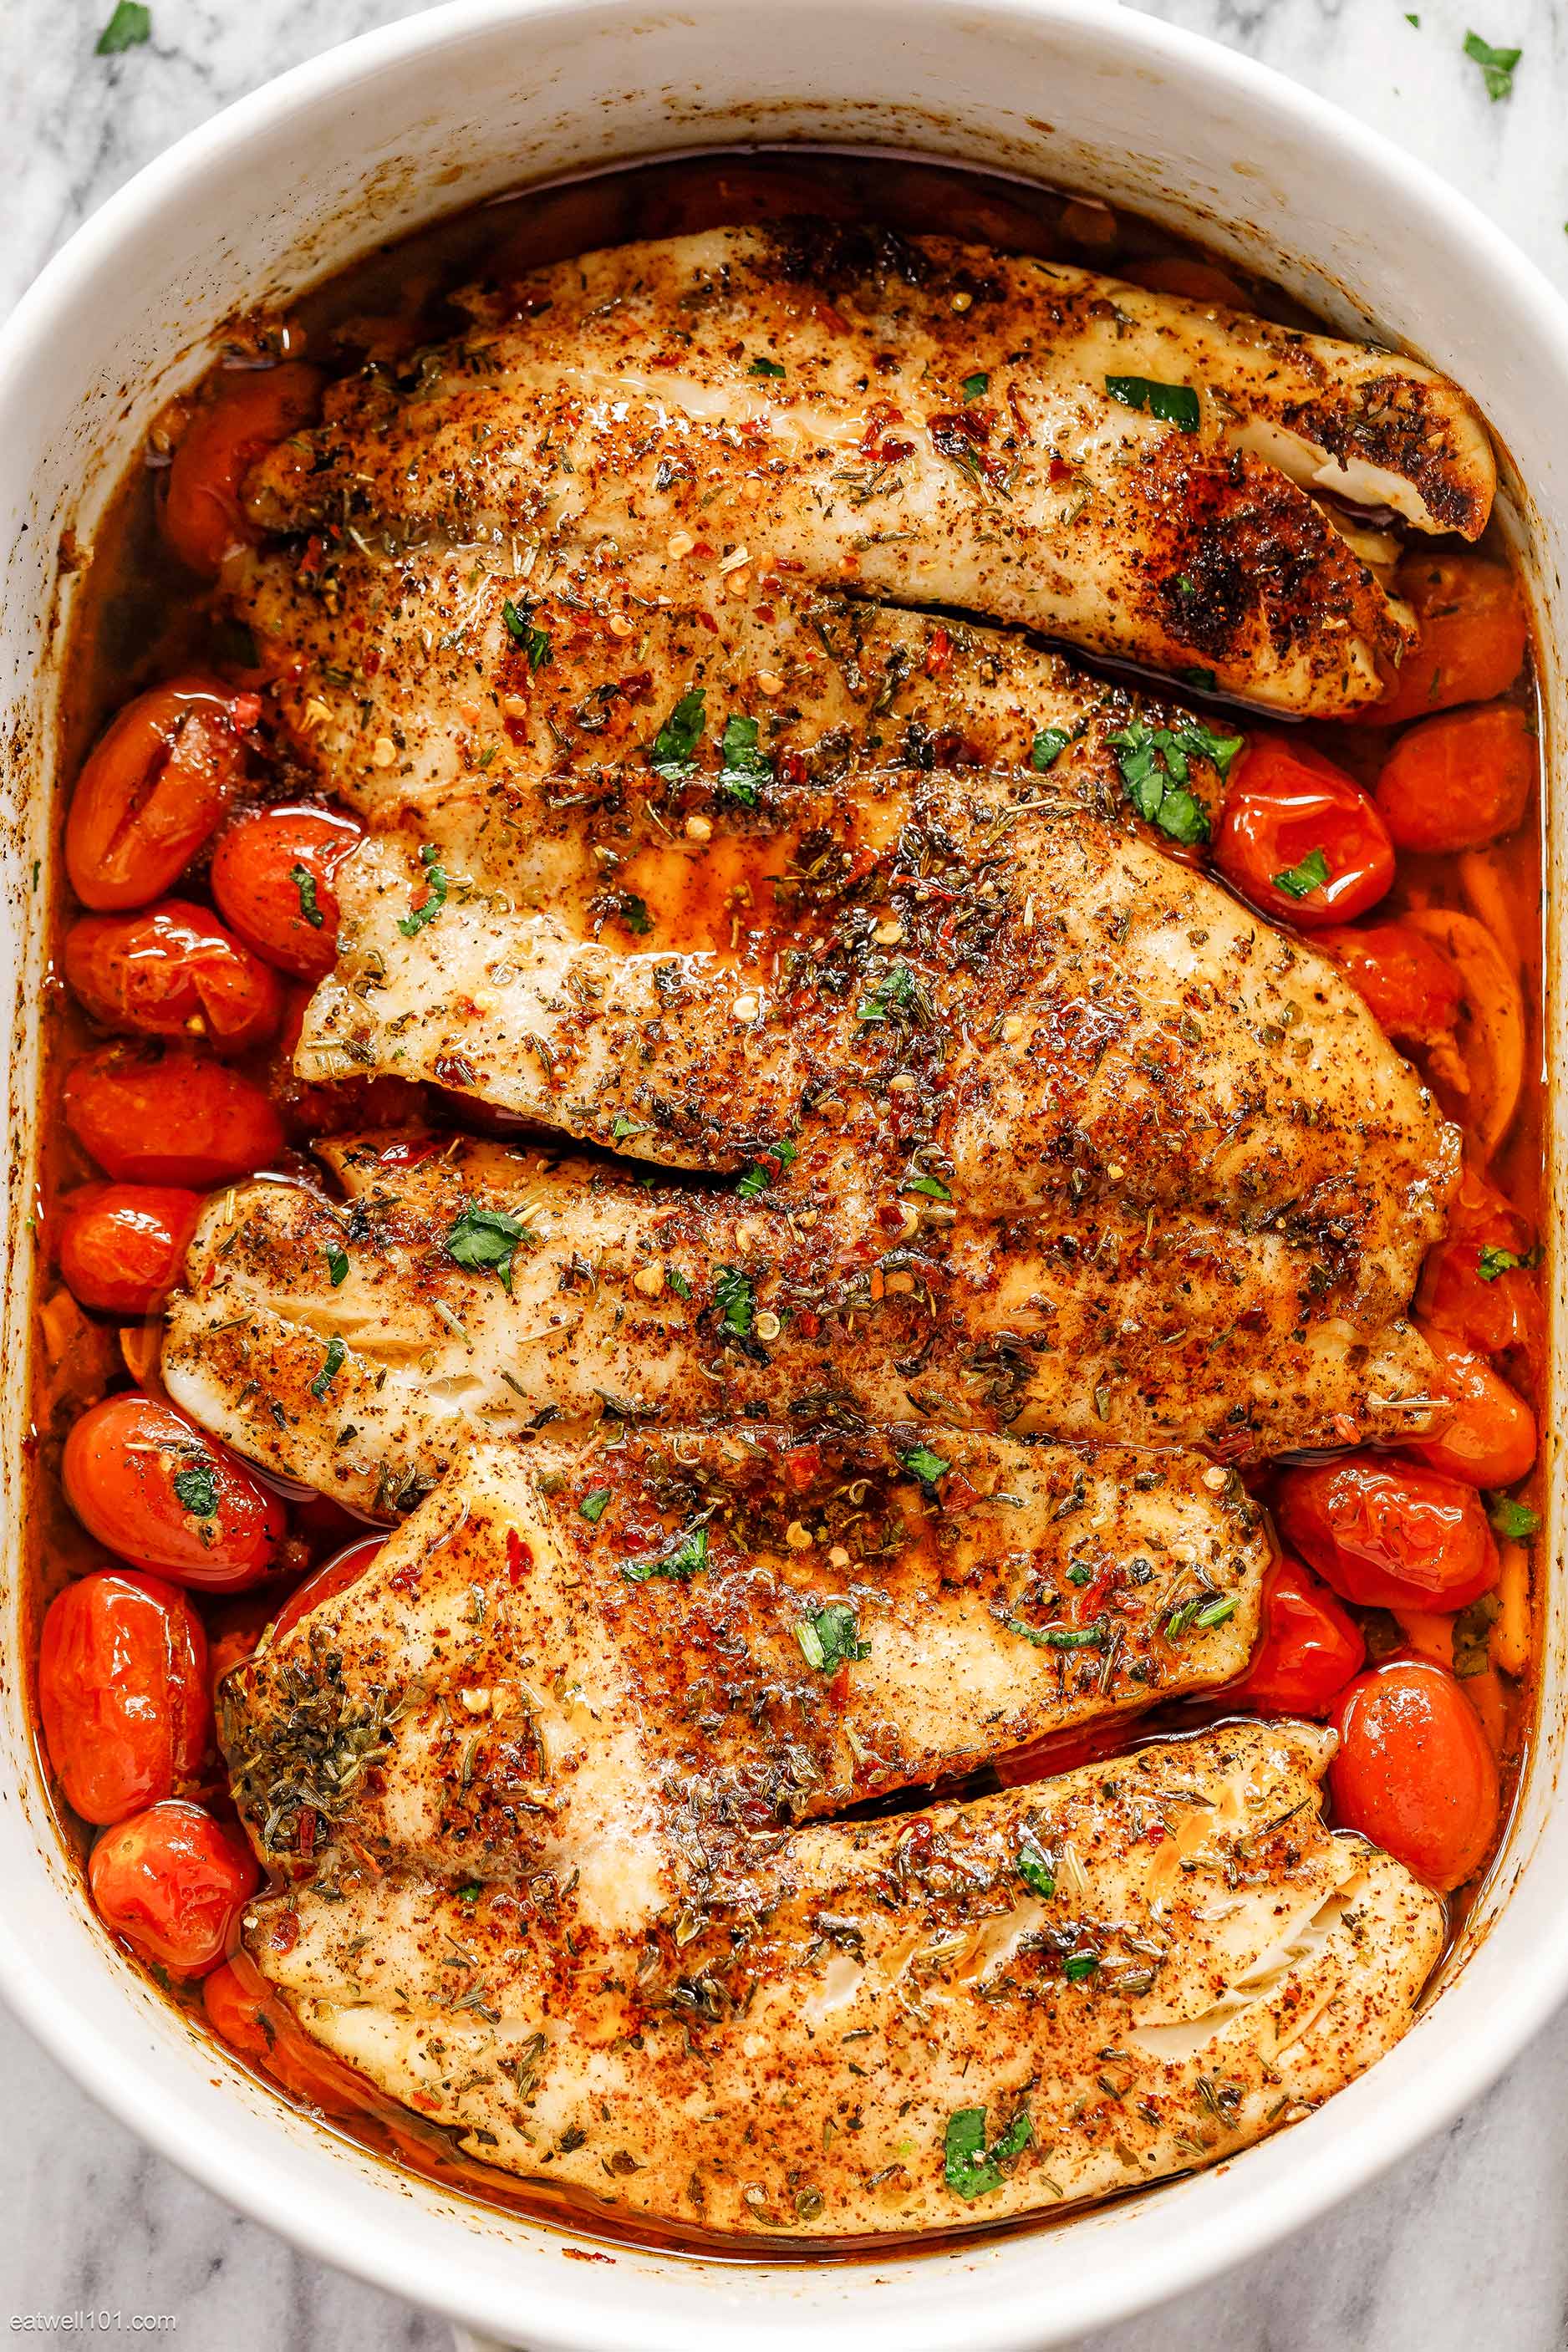 Oven Roasted Fish With Cherry Tomatoes recipe